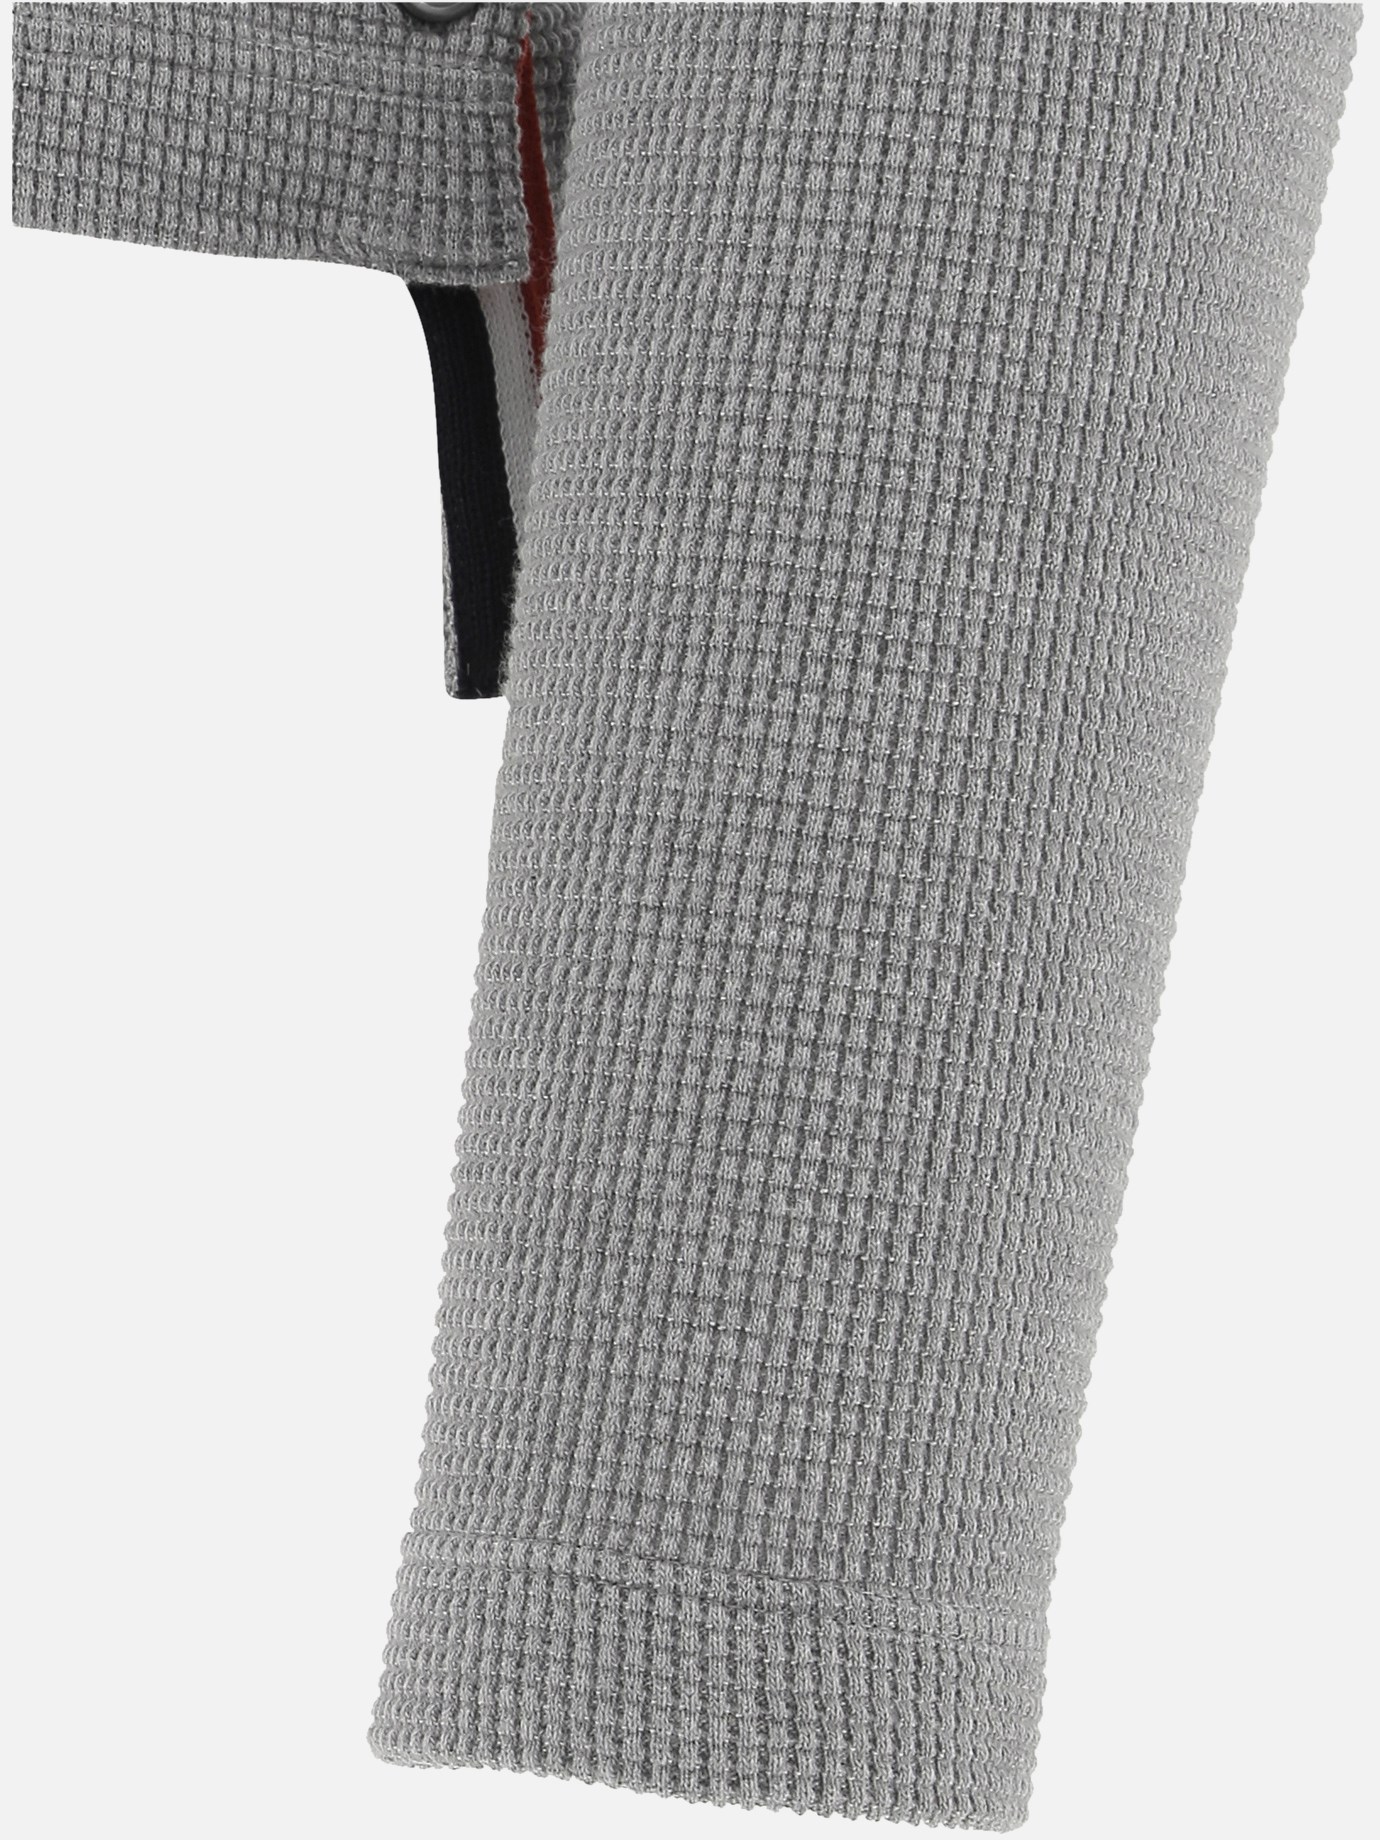  4-bar  turtleneck sweater by Thom Browne